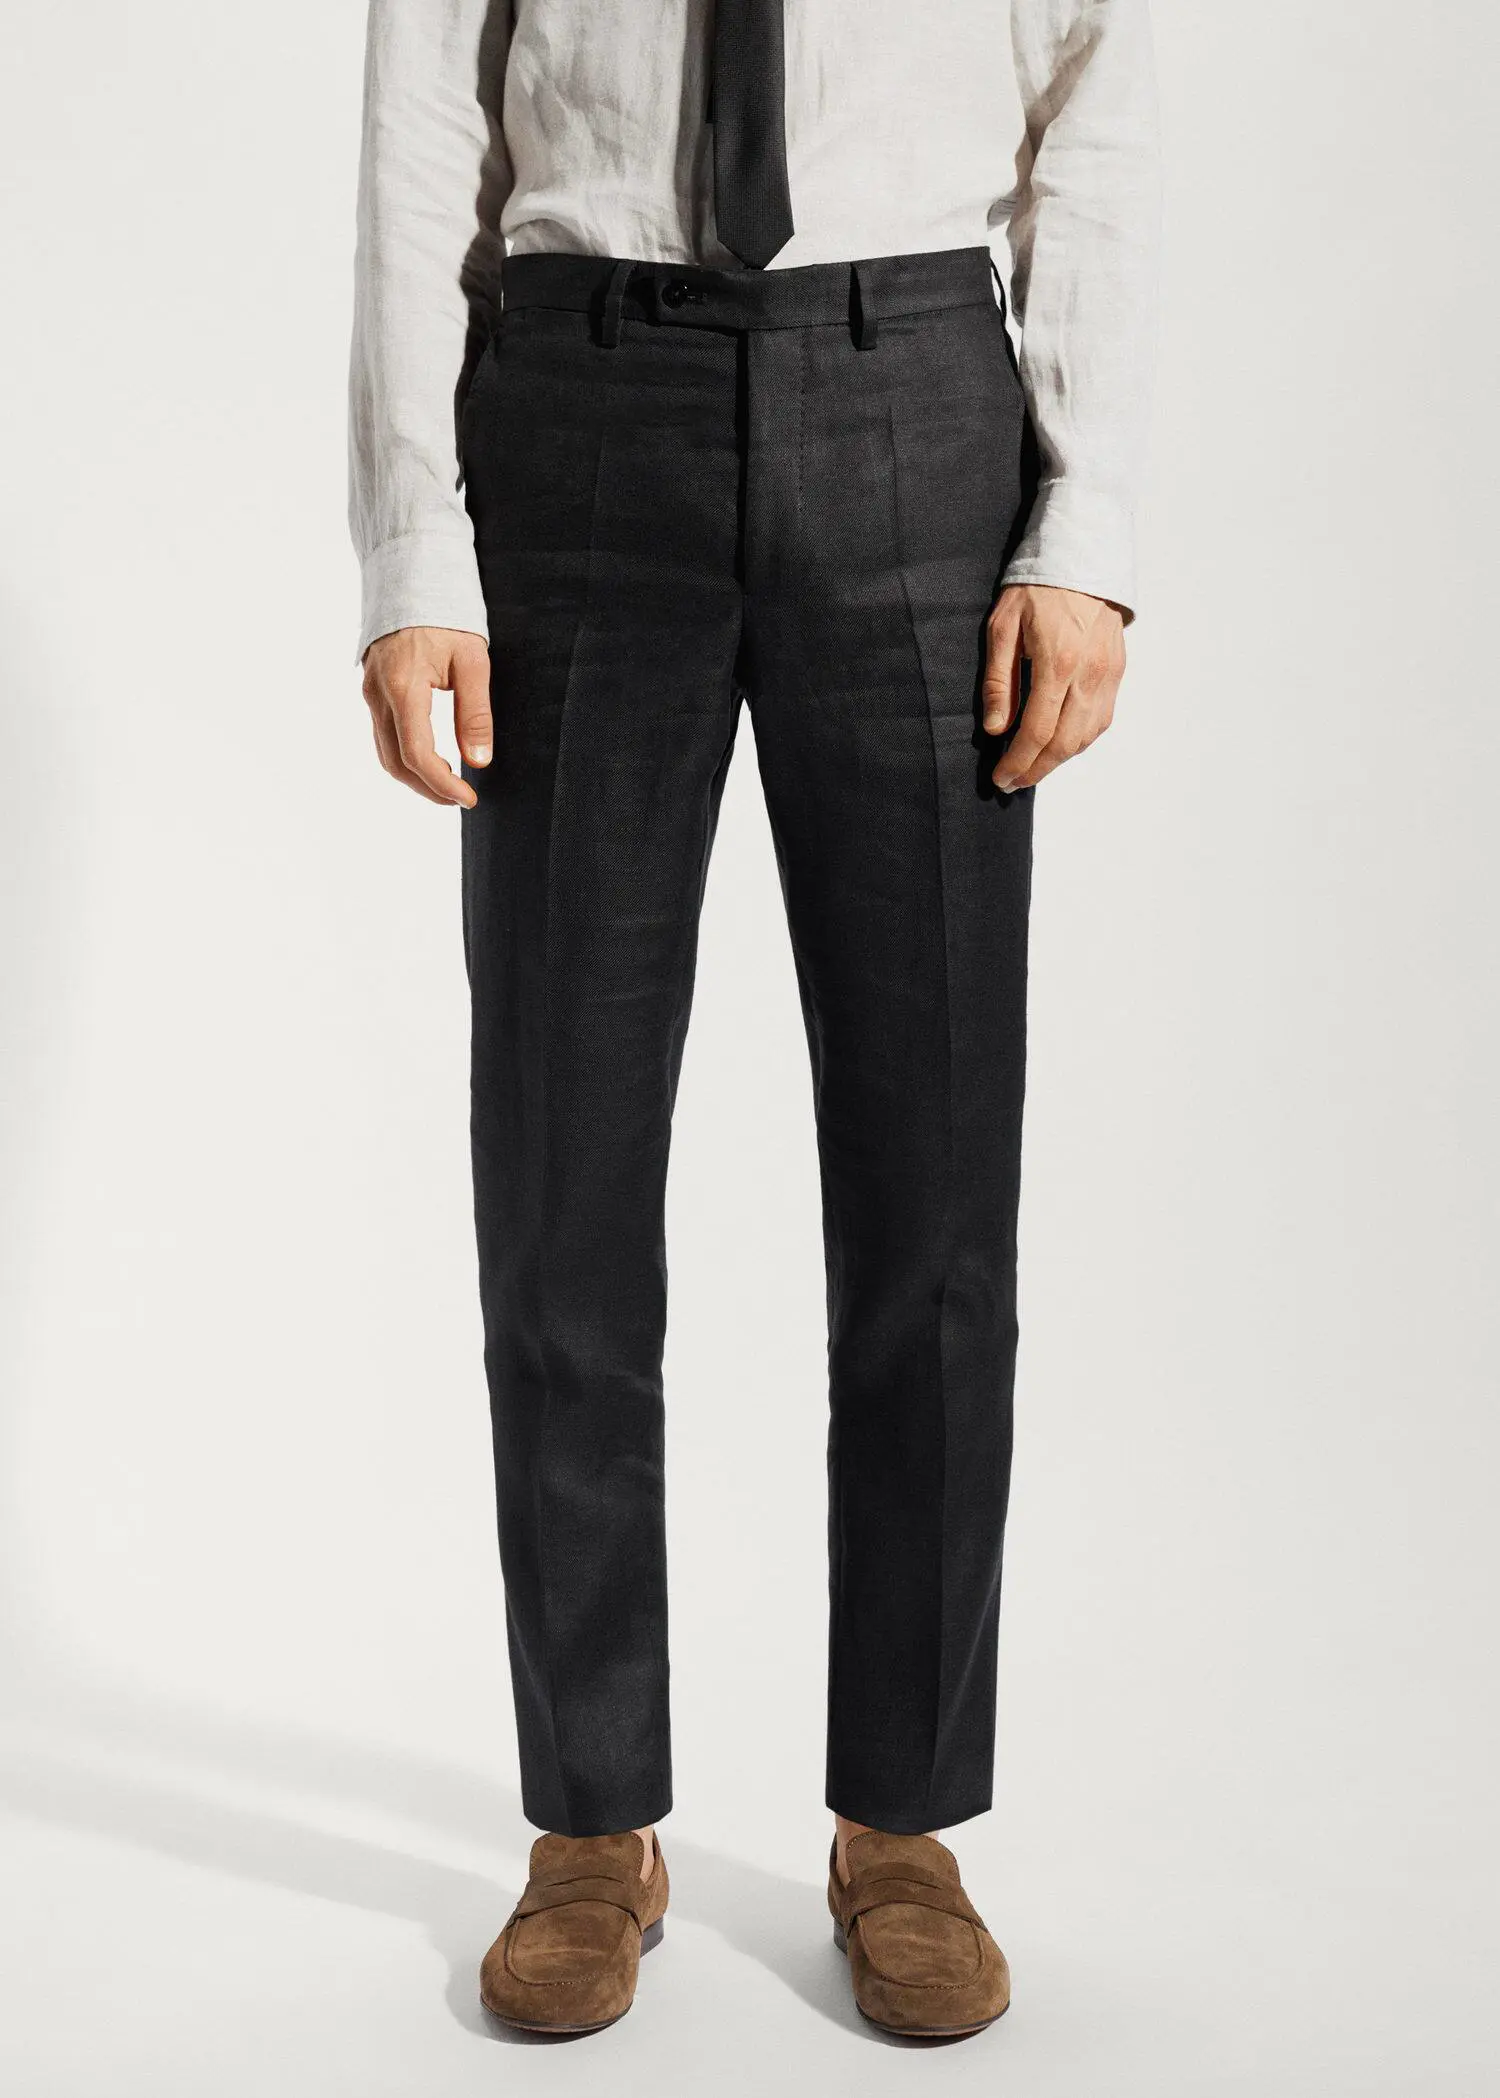 Mango 100% linen suit trousers. a man wearing a white shirt and black pants. 